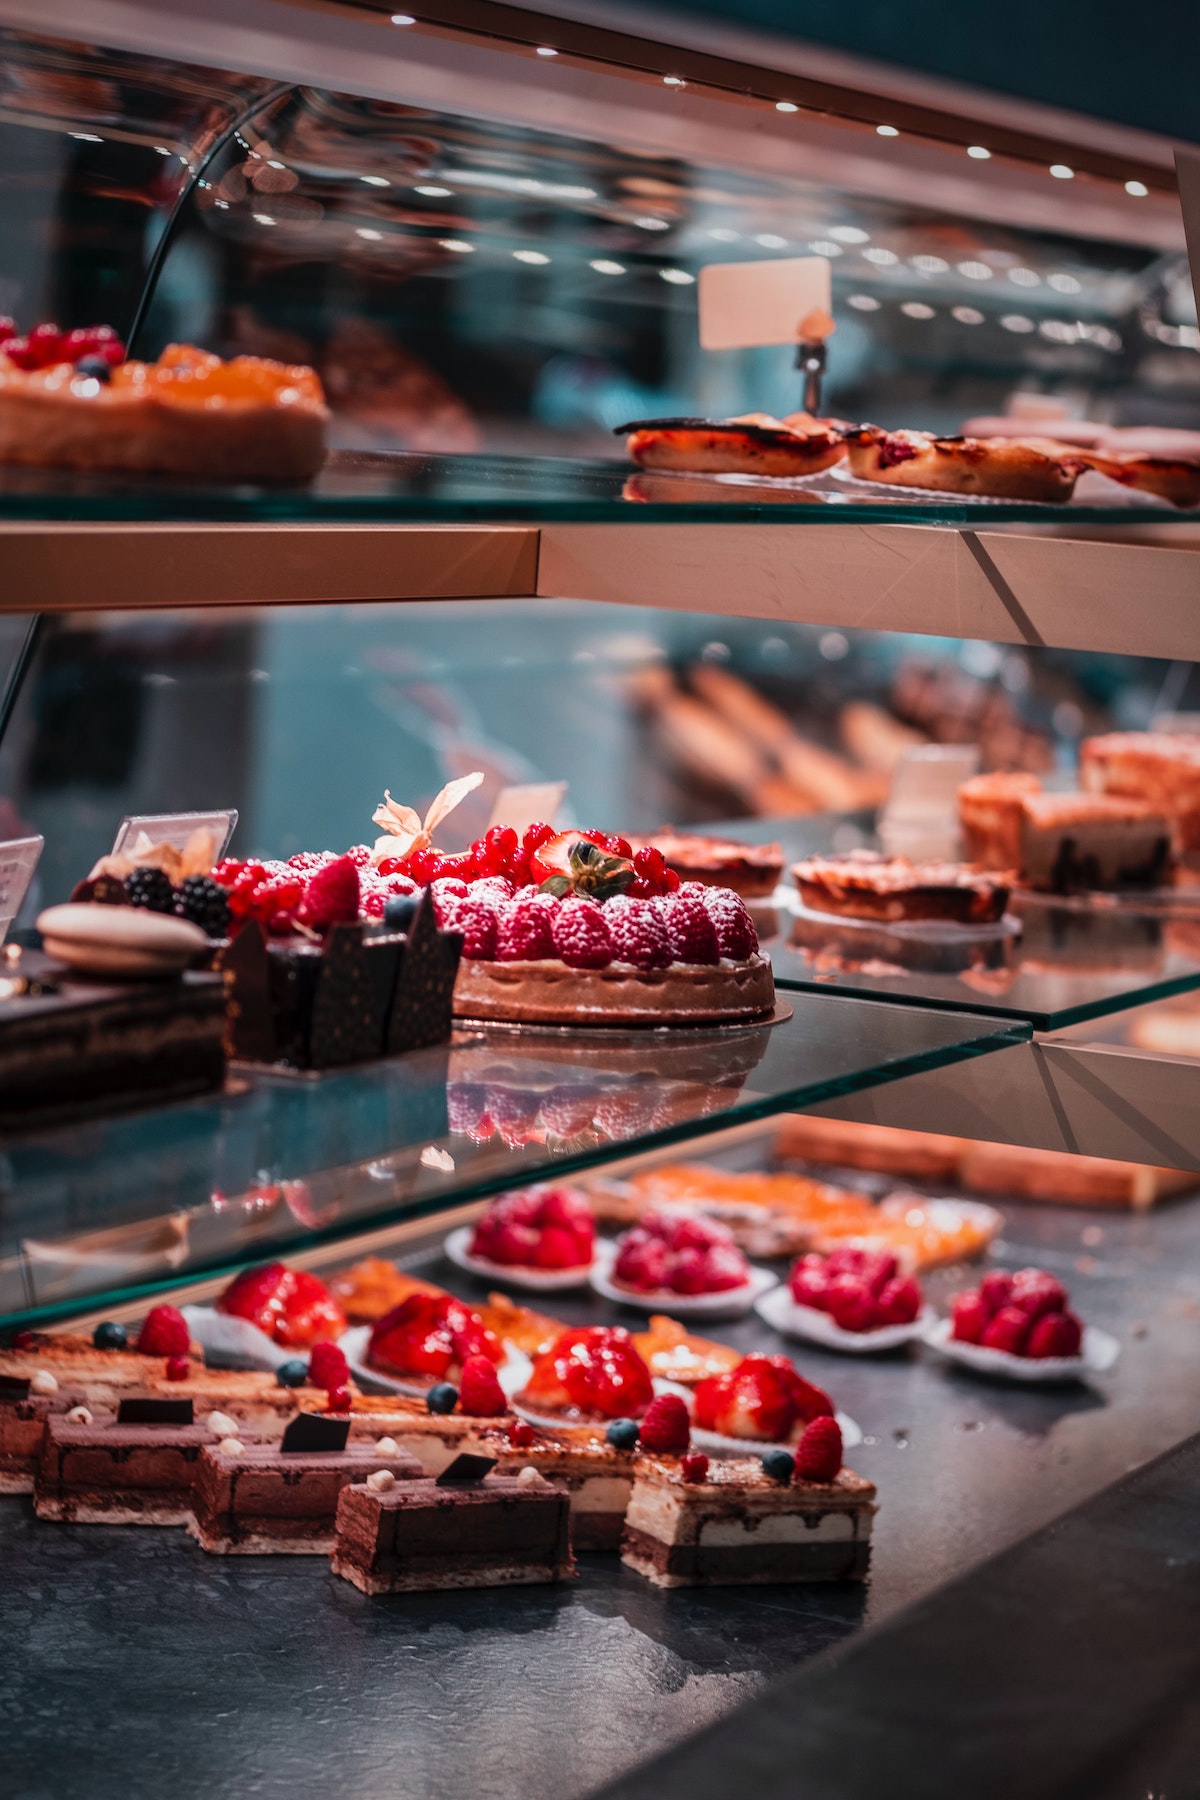 Small cakes garnished with strawberries and other fruits in a bakery display case.